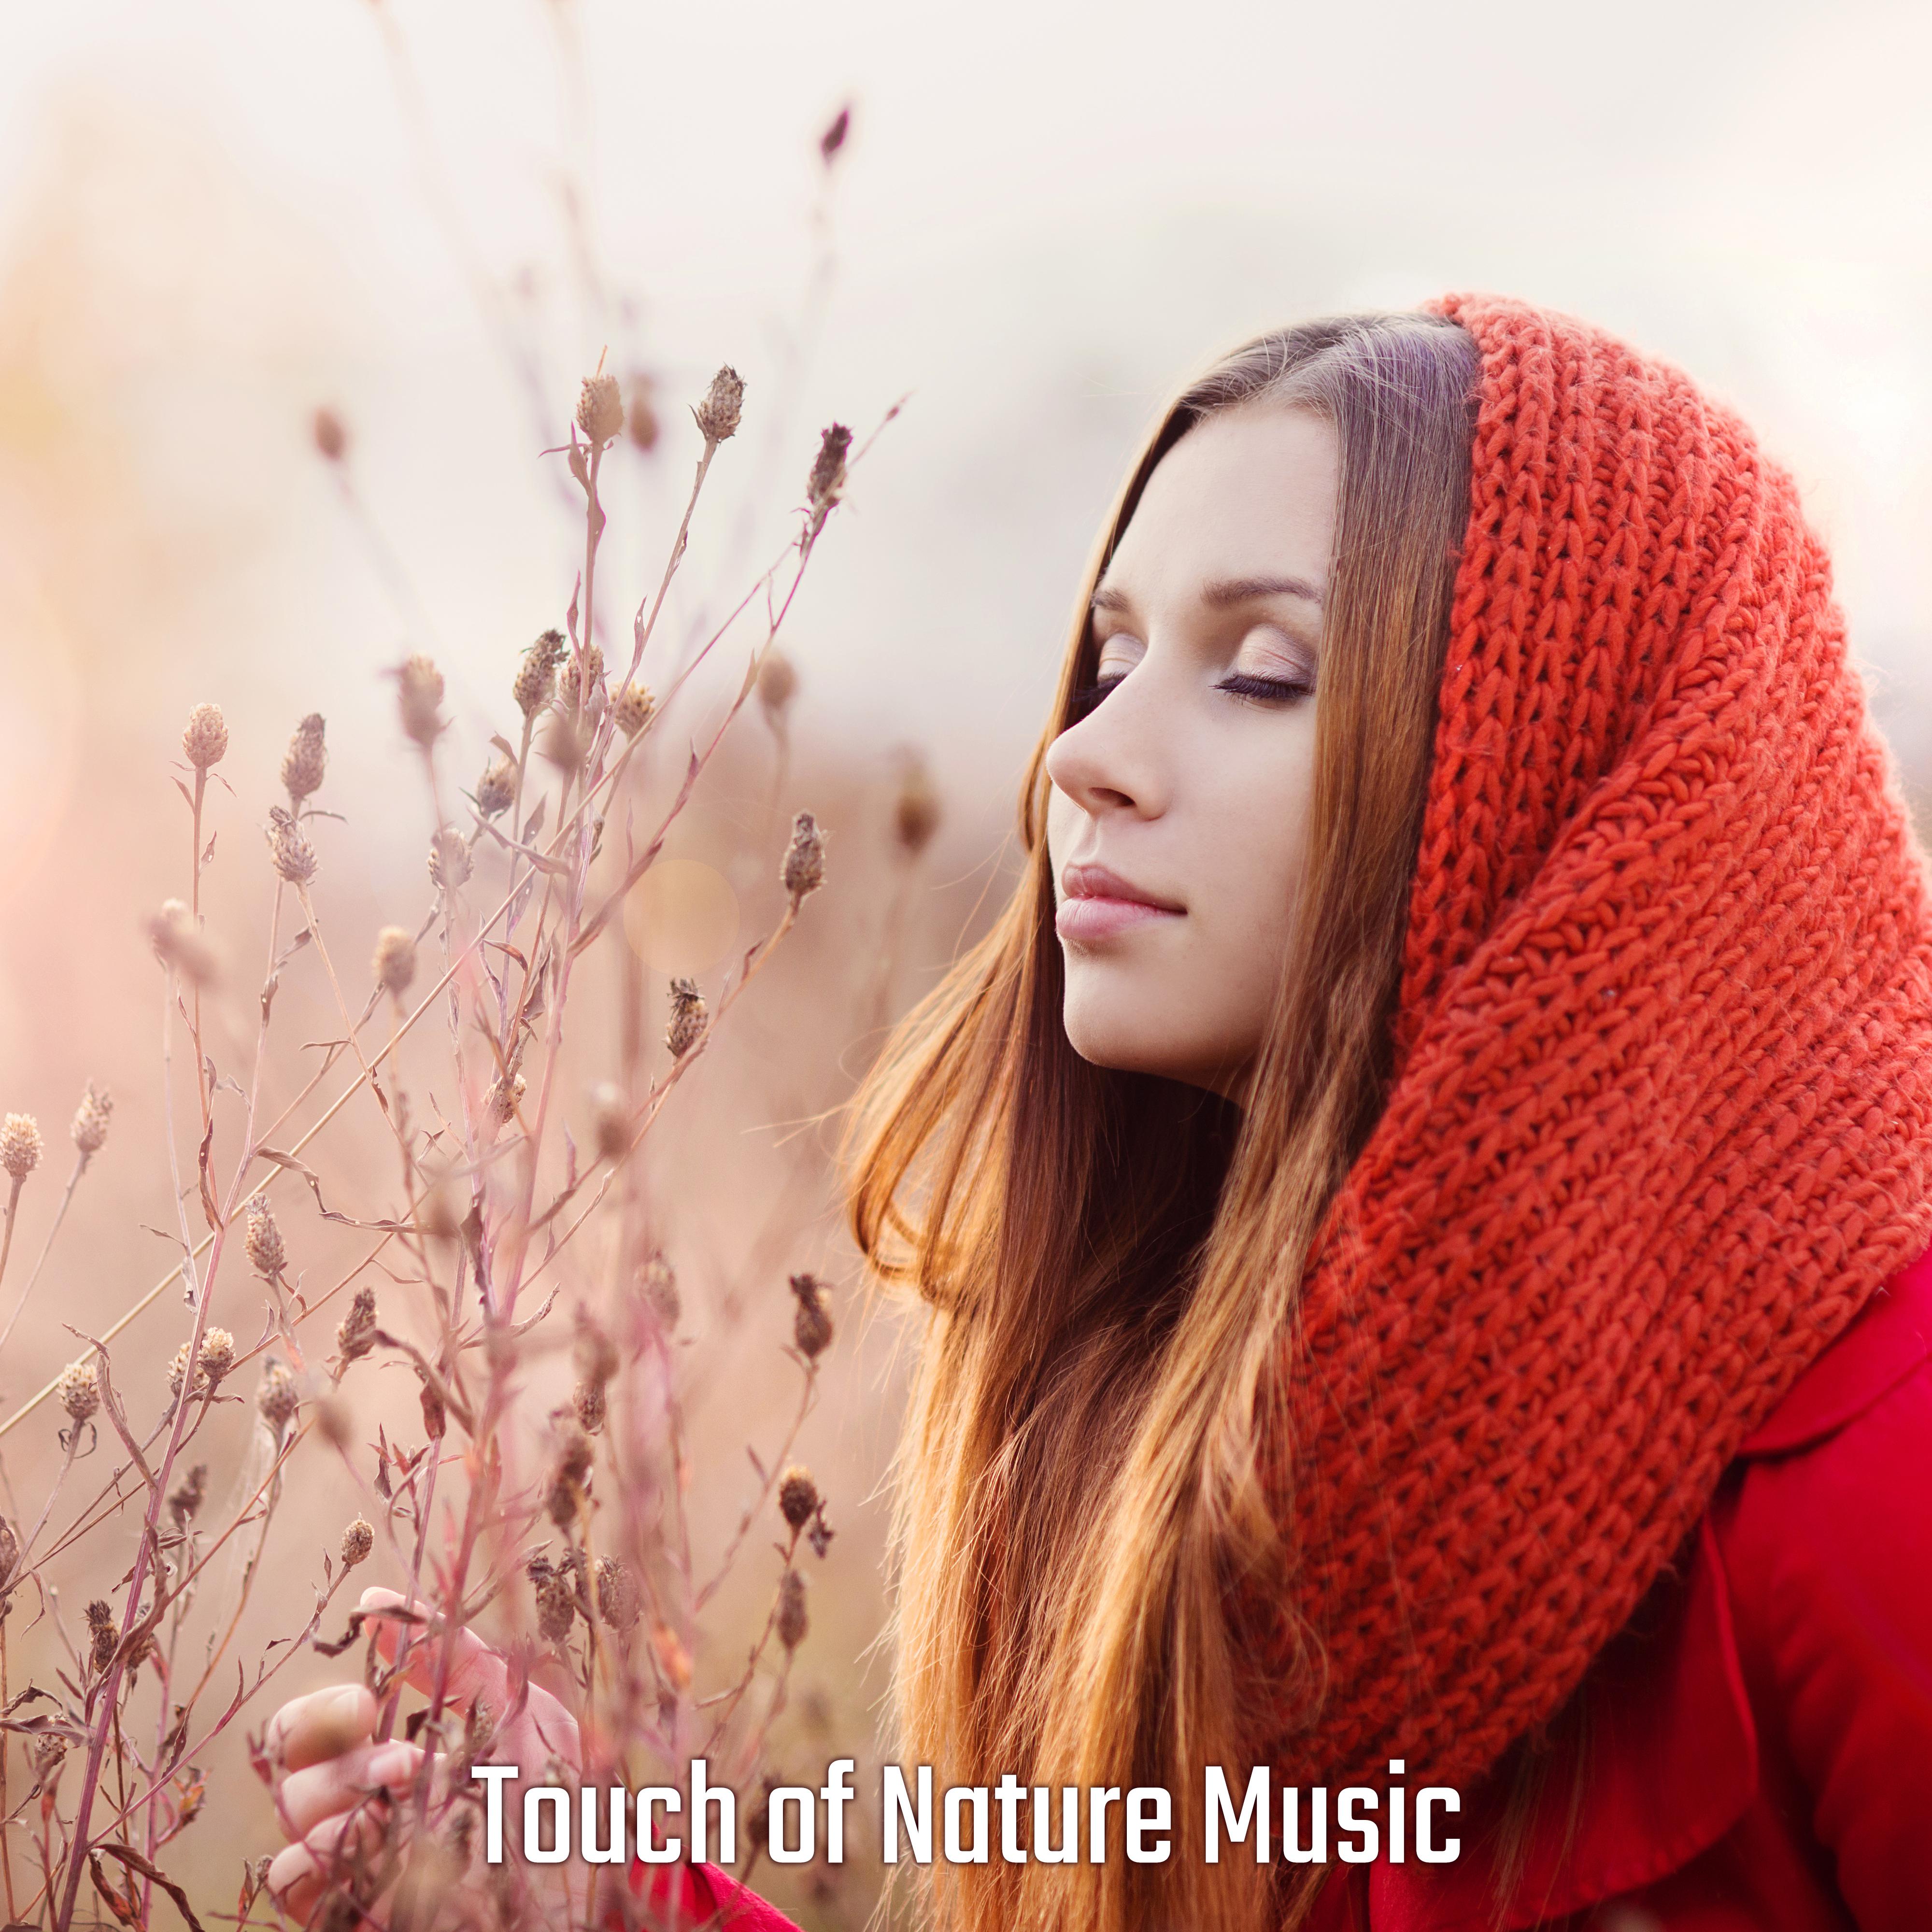 Touch of Nature Music – Soothing Nature Sounds for Relaxation, Sleep, Deep Meditation, Ambient Music, Zen, New Age Relaxing Collection, Stress Relief